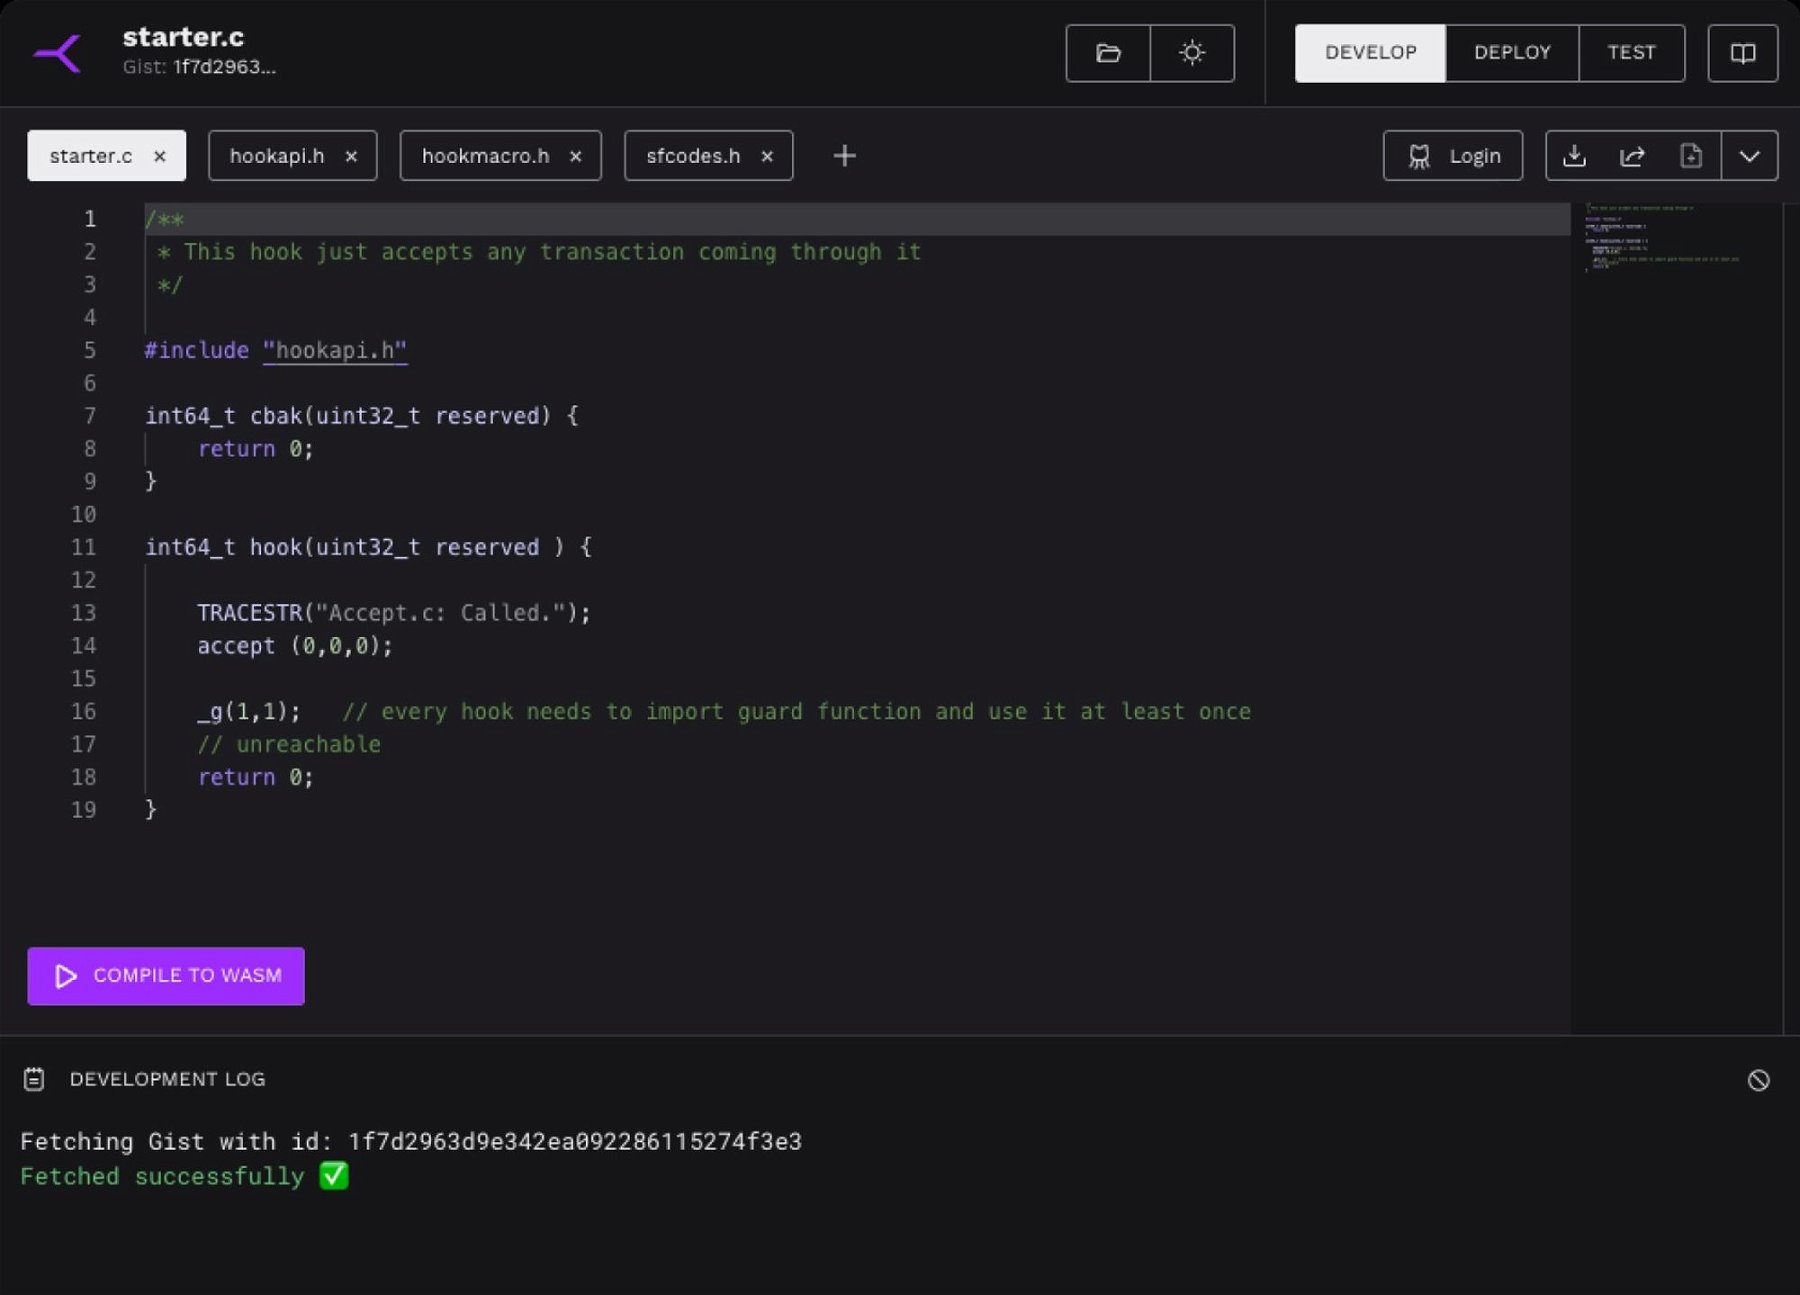 Using Hooks Builder, you can develop, test, debug and deploy your own Hooks on our testnet, using our examples or building your own from scratch.